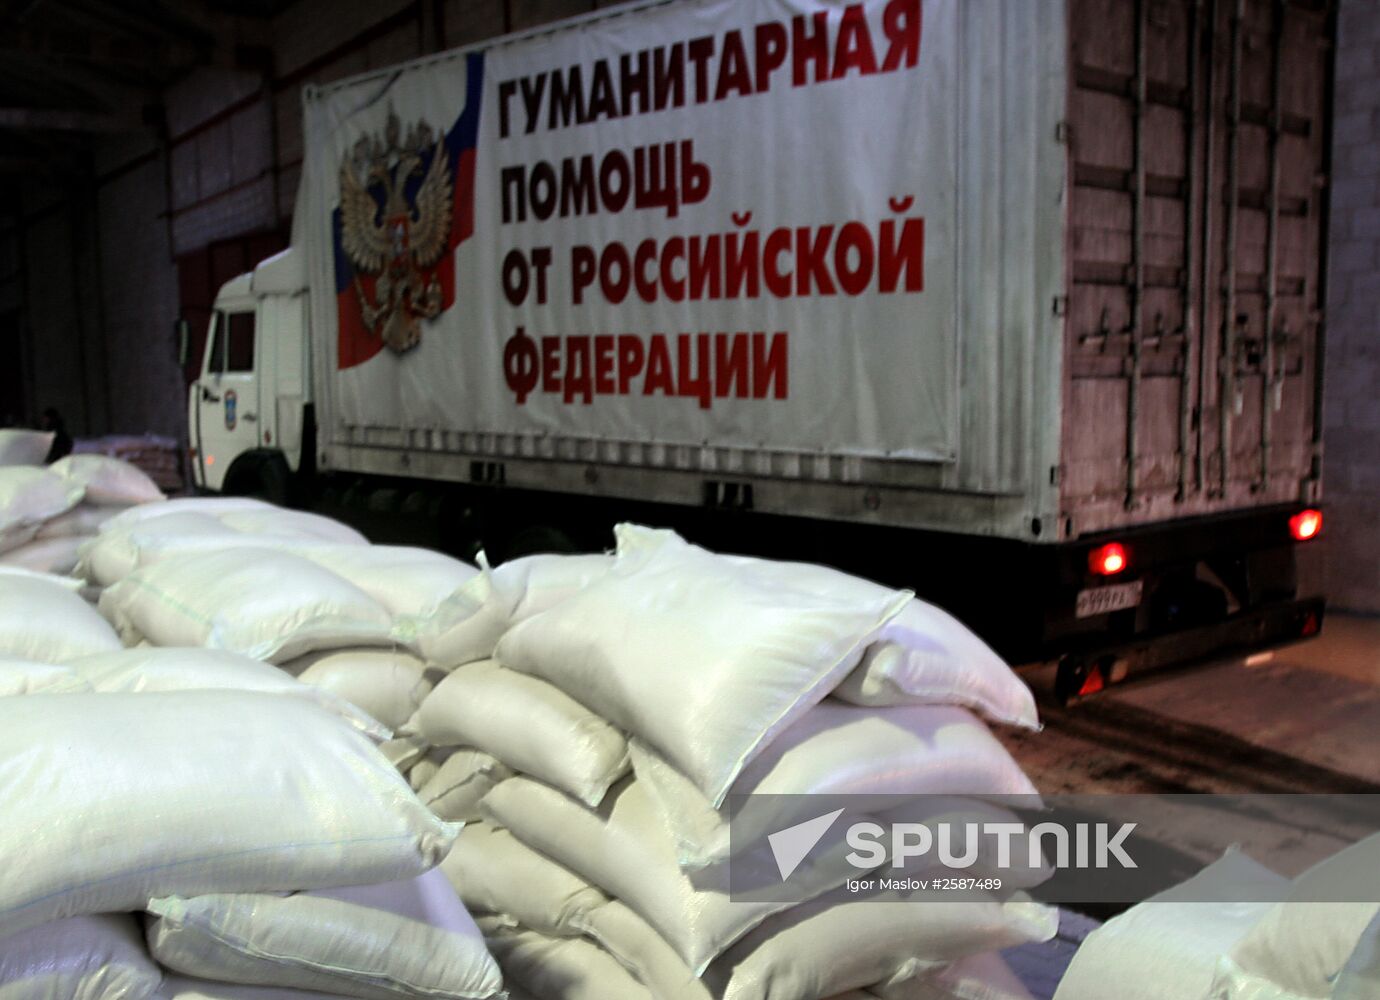 Russian Emergencies Ministry’s special humanitarian aid convoy for Donbas arrives in Donetsk